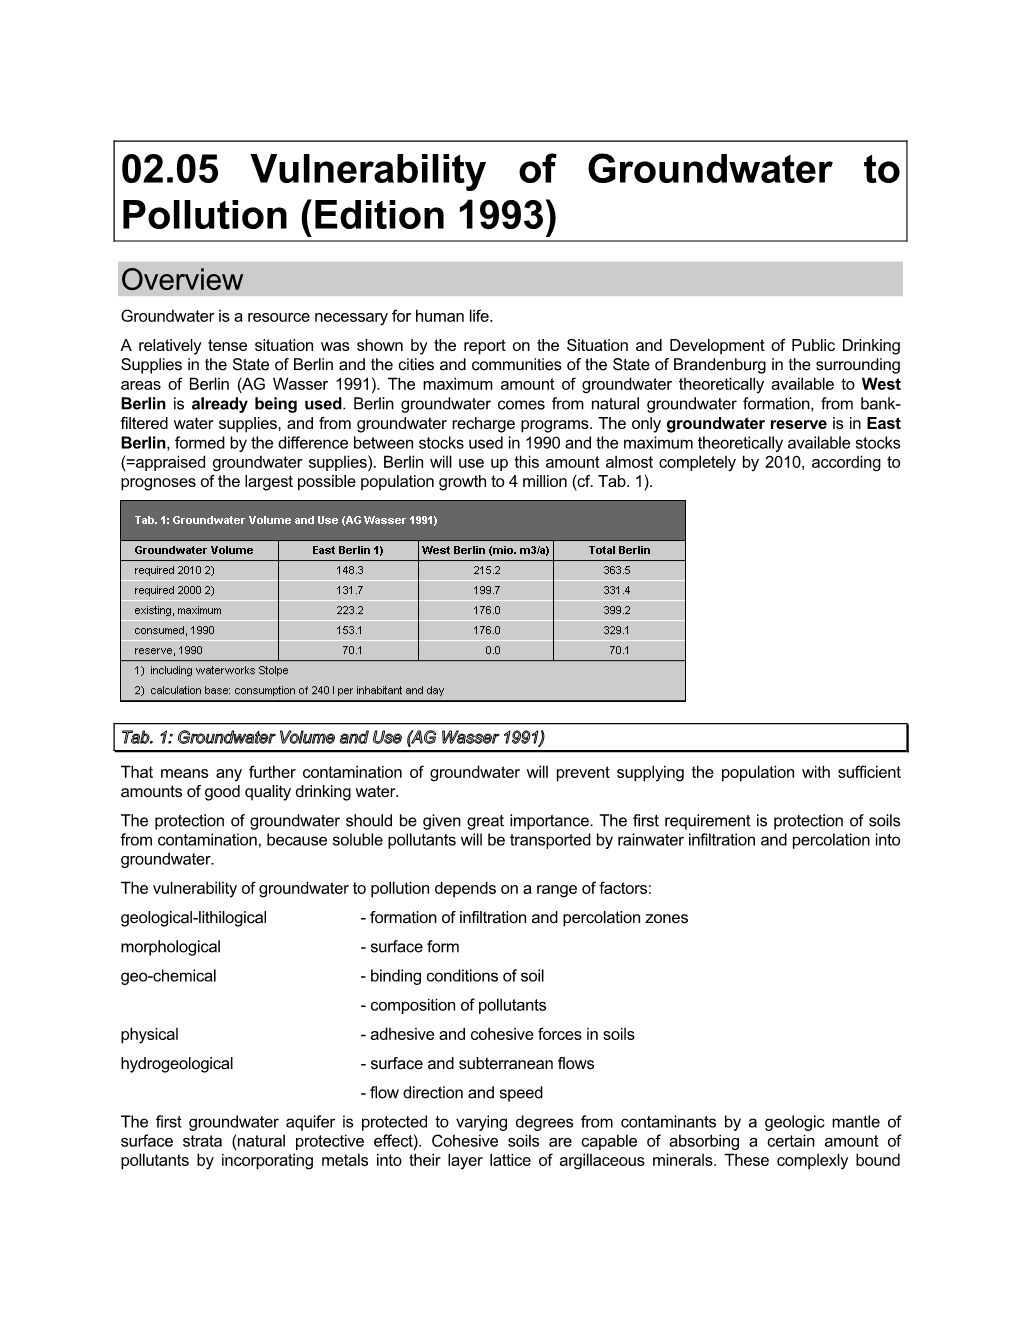 02.05 Vulnerability of Groundwater to Pollution (Edition 1993) Overview Groundwater Is a Resource Necessary for Human Life